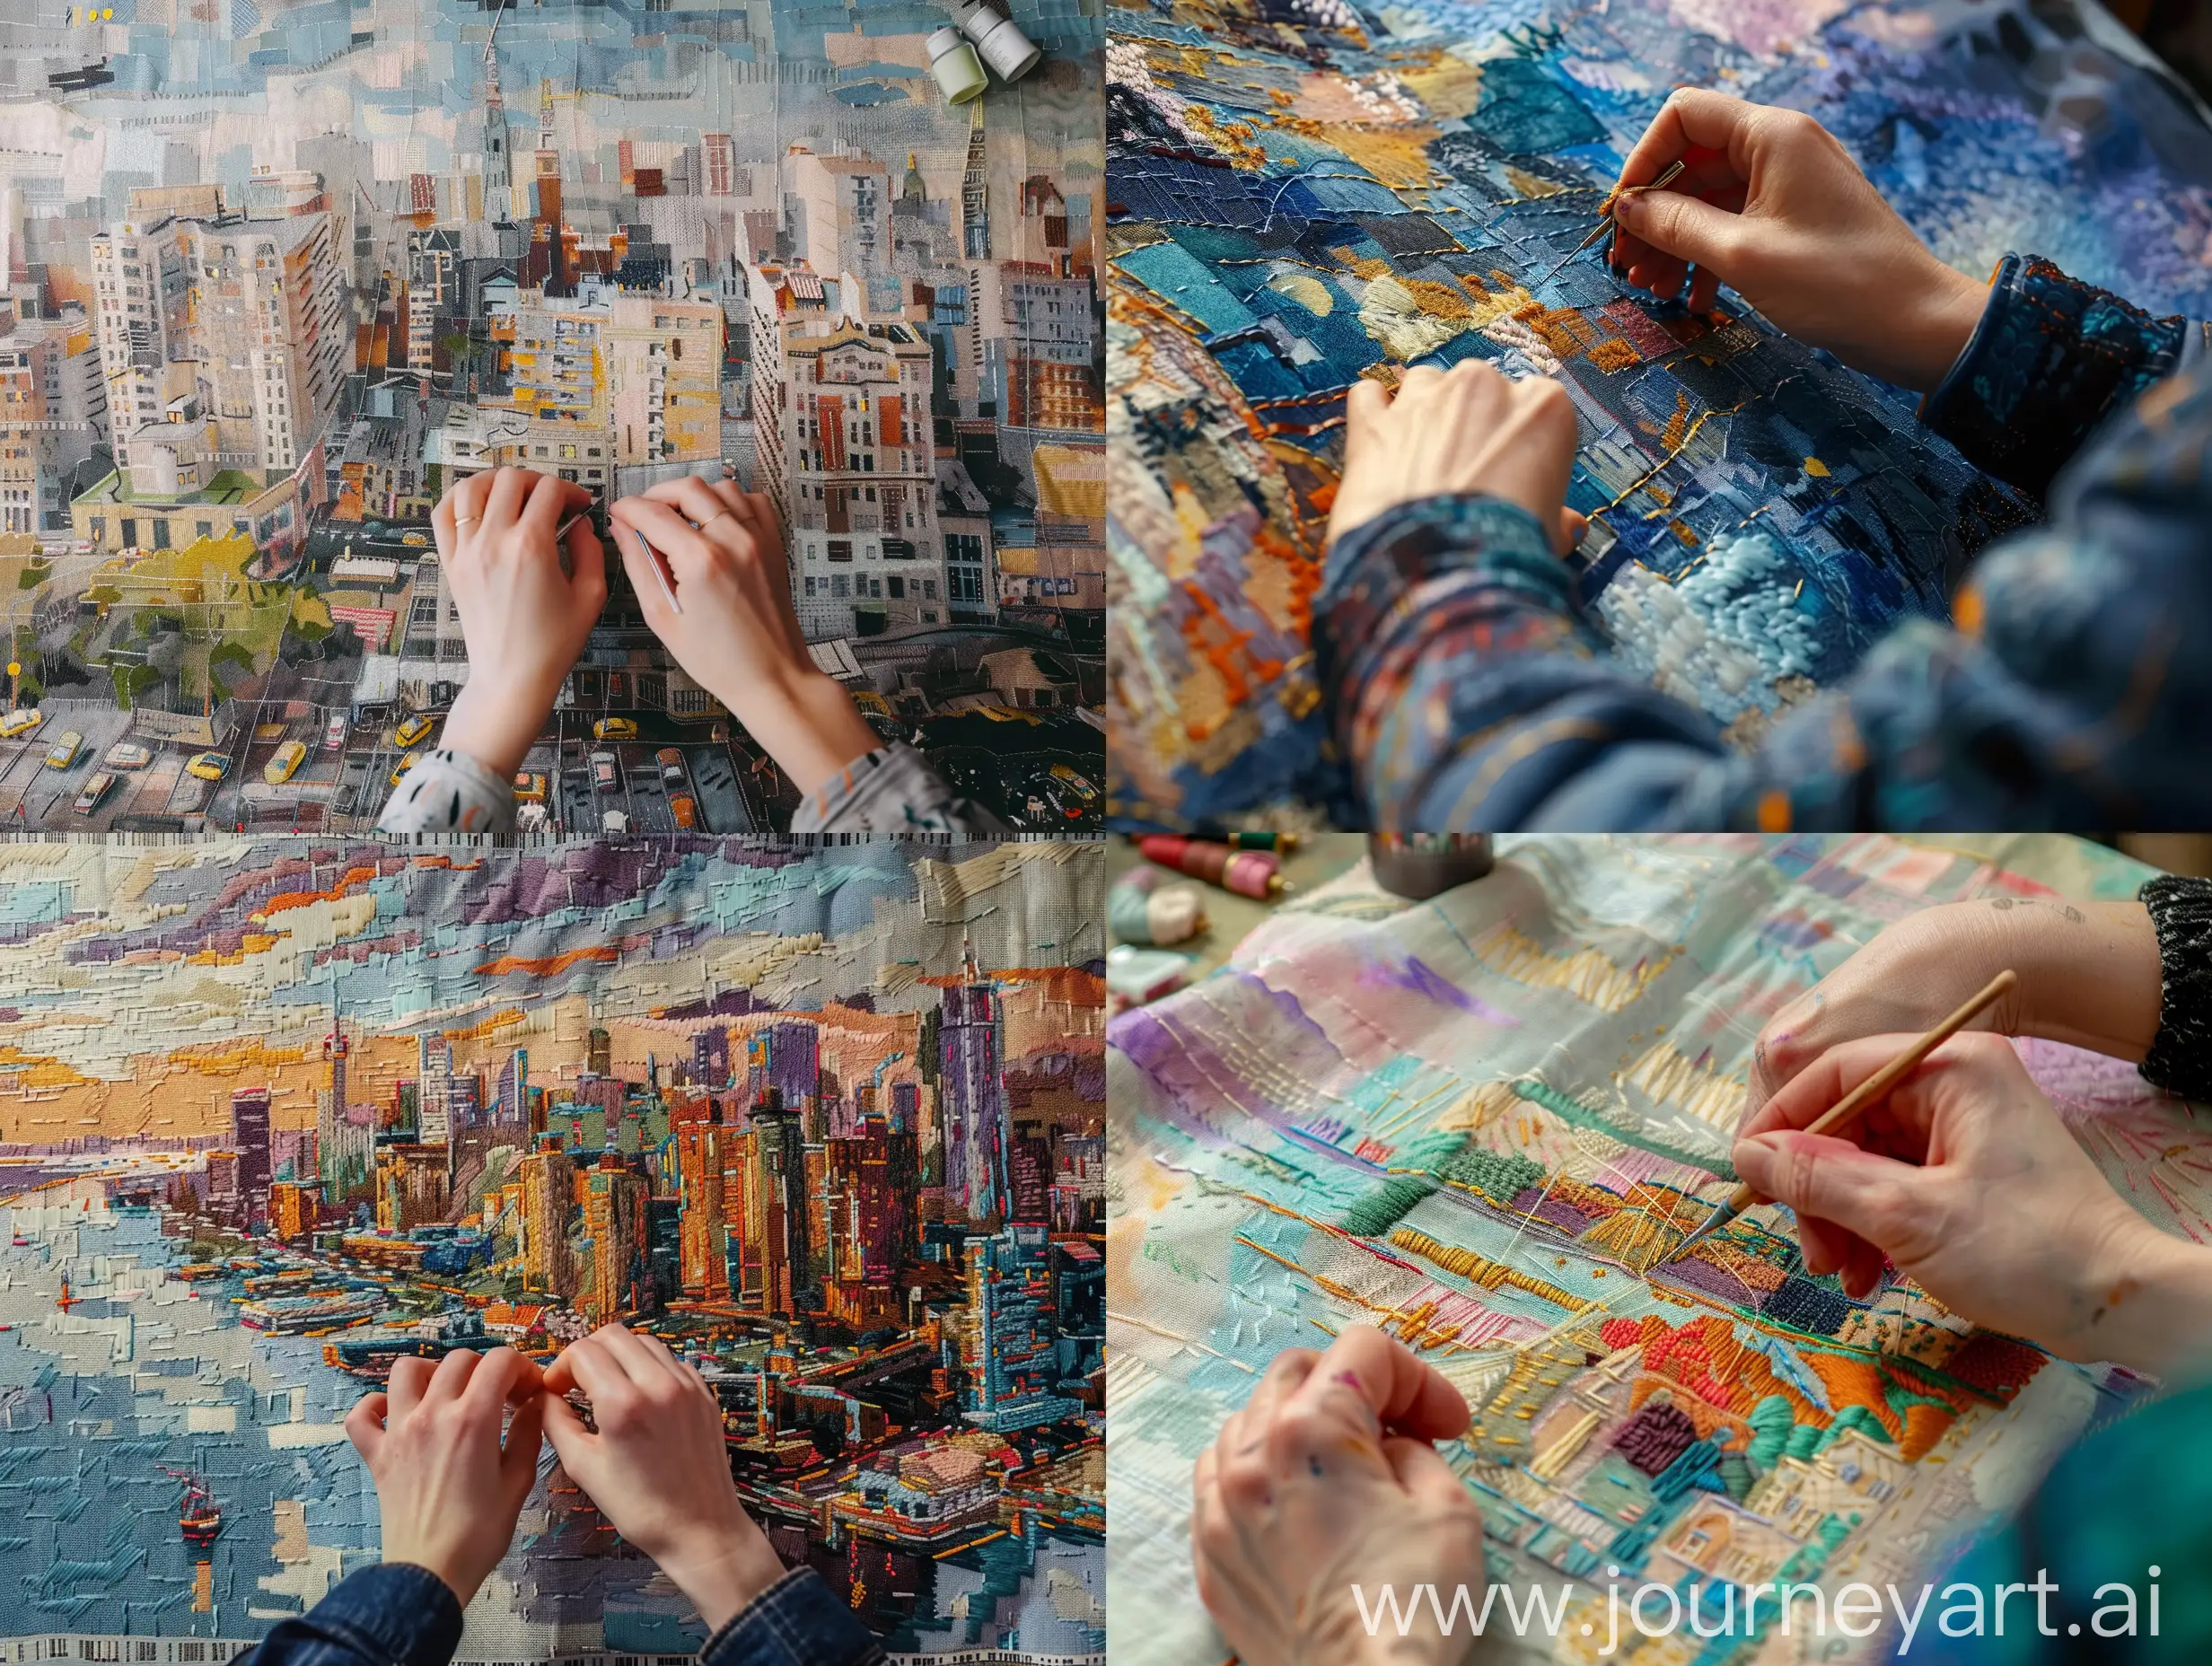 First-person view, hands embroider on the canvas a picture of the urban landscape in the form of a panorama, smooth movements